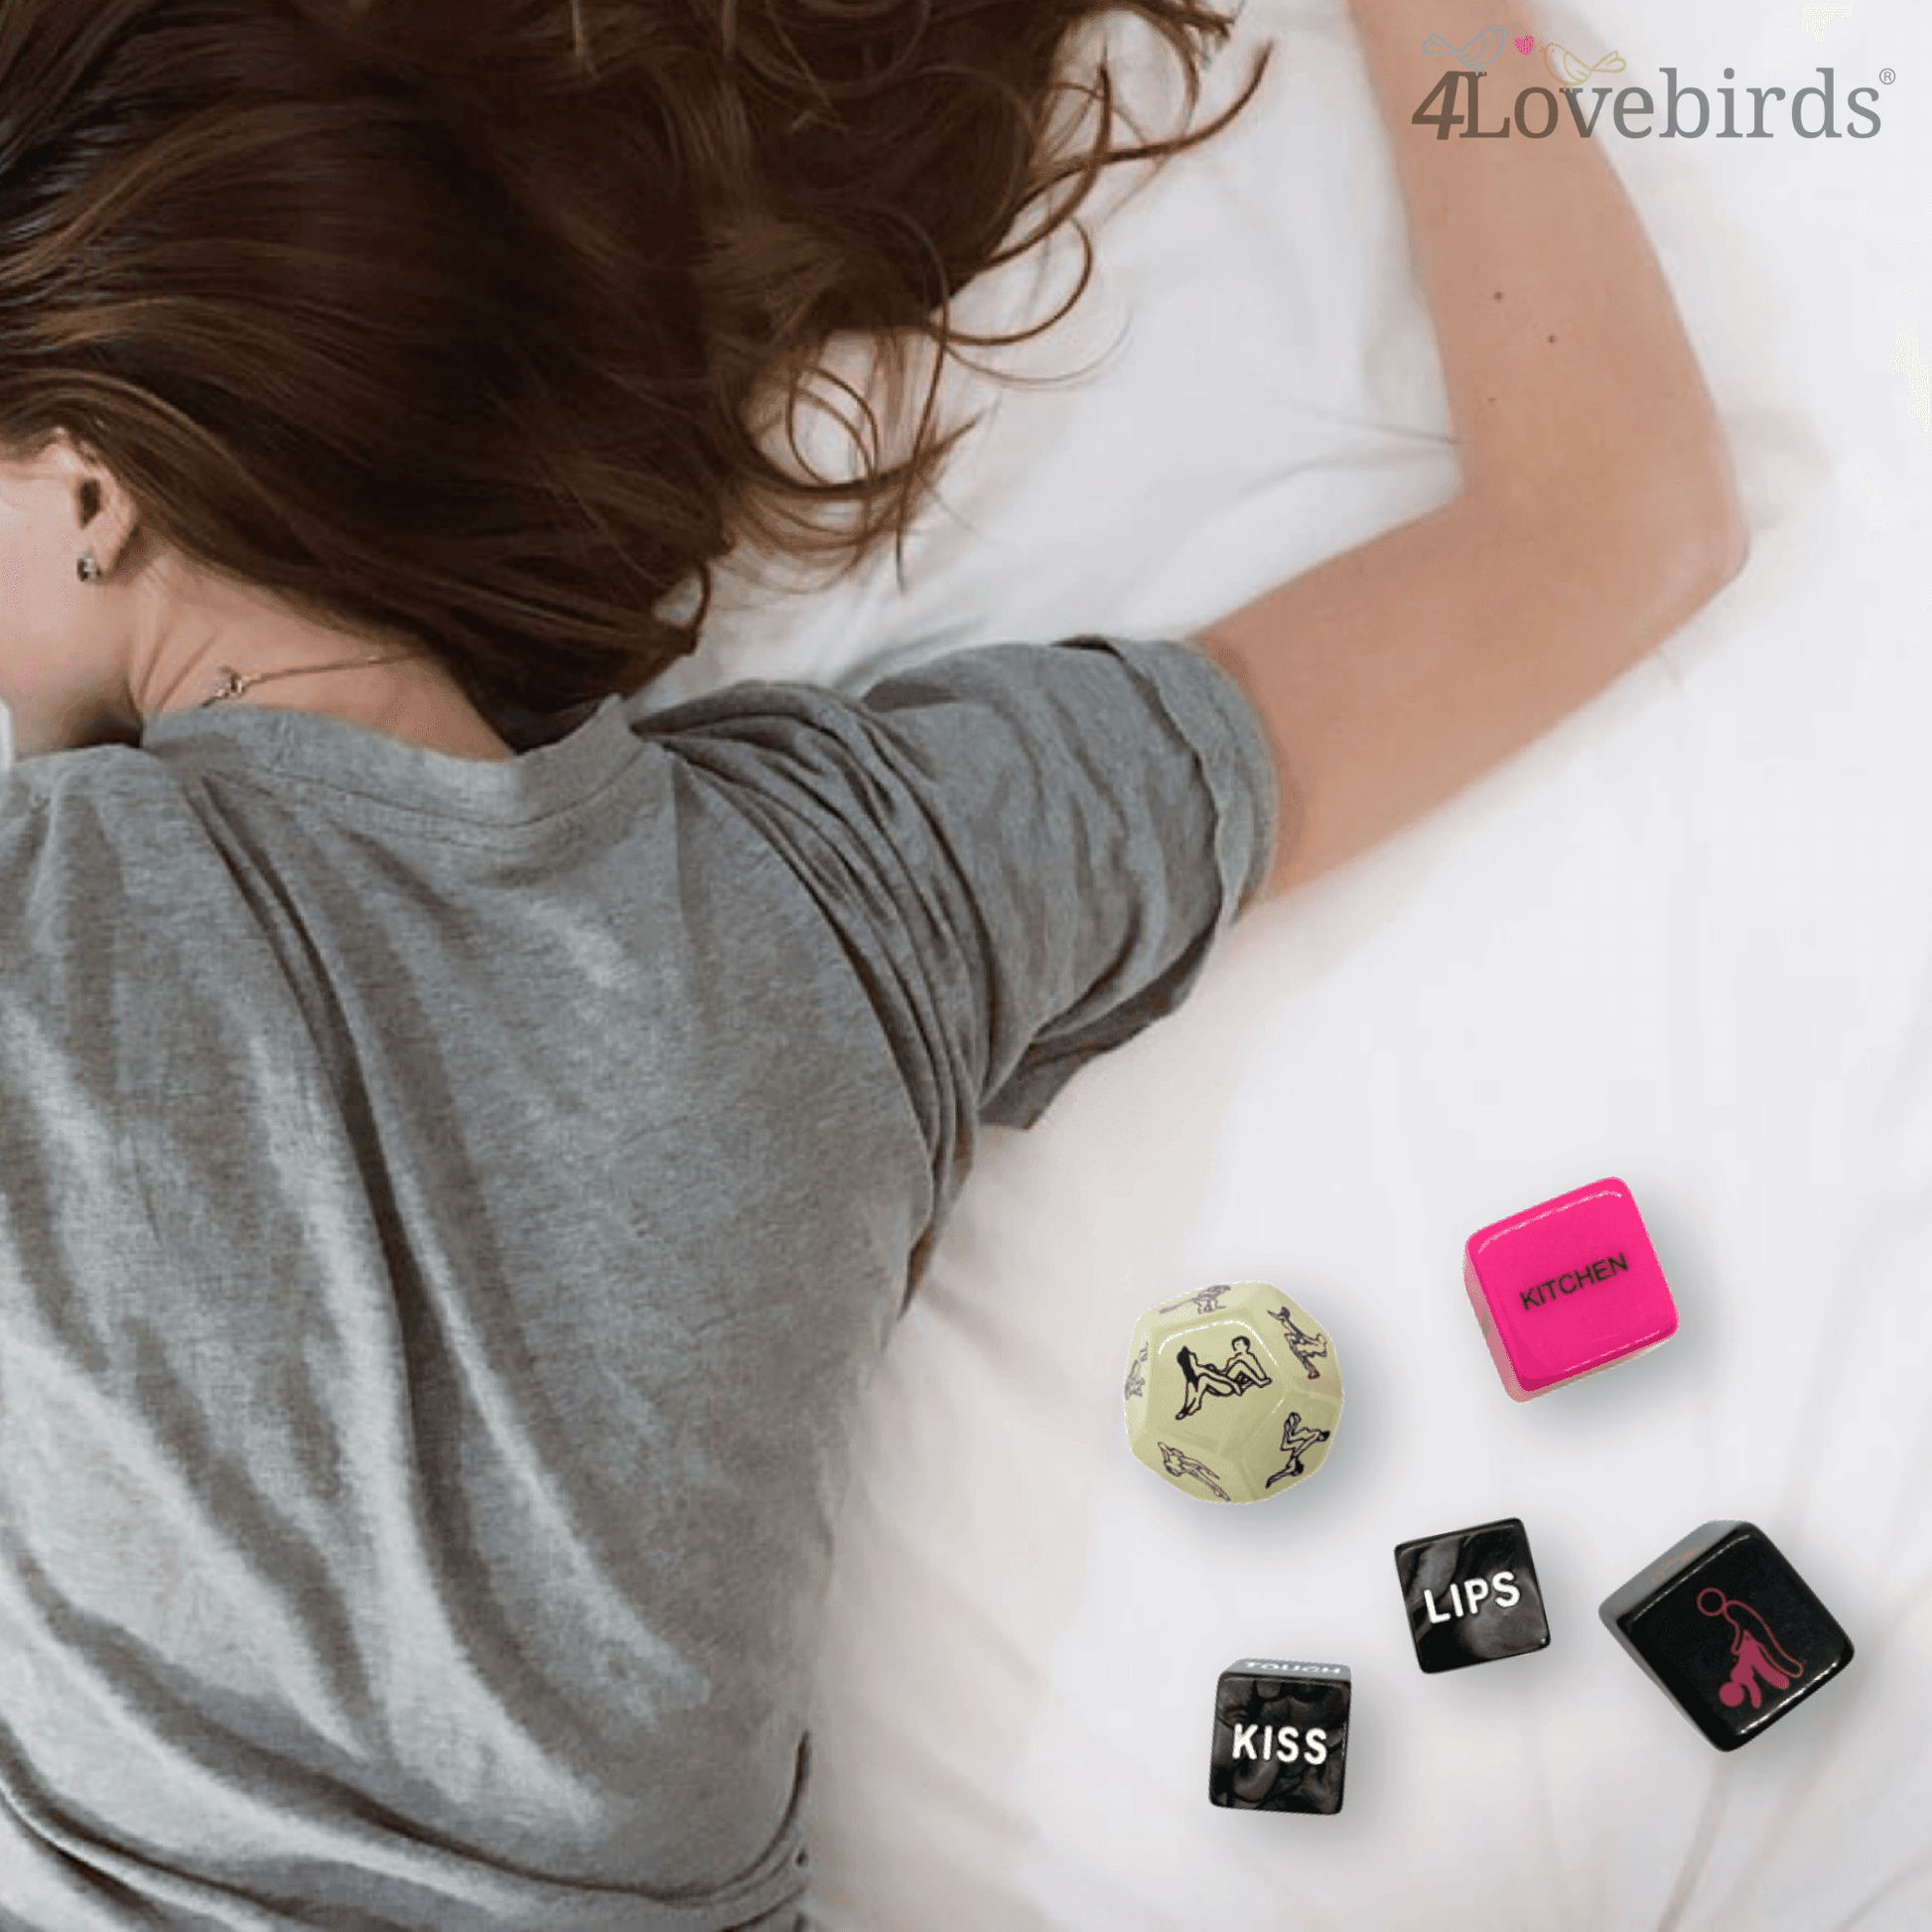 Sex Dice, sex positions, fun in the bedroom, bedroom game, fun game, husband birthday, wife birthday, anniversary gift, valentine’s day - 4Lovebirds